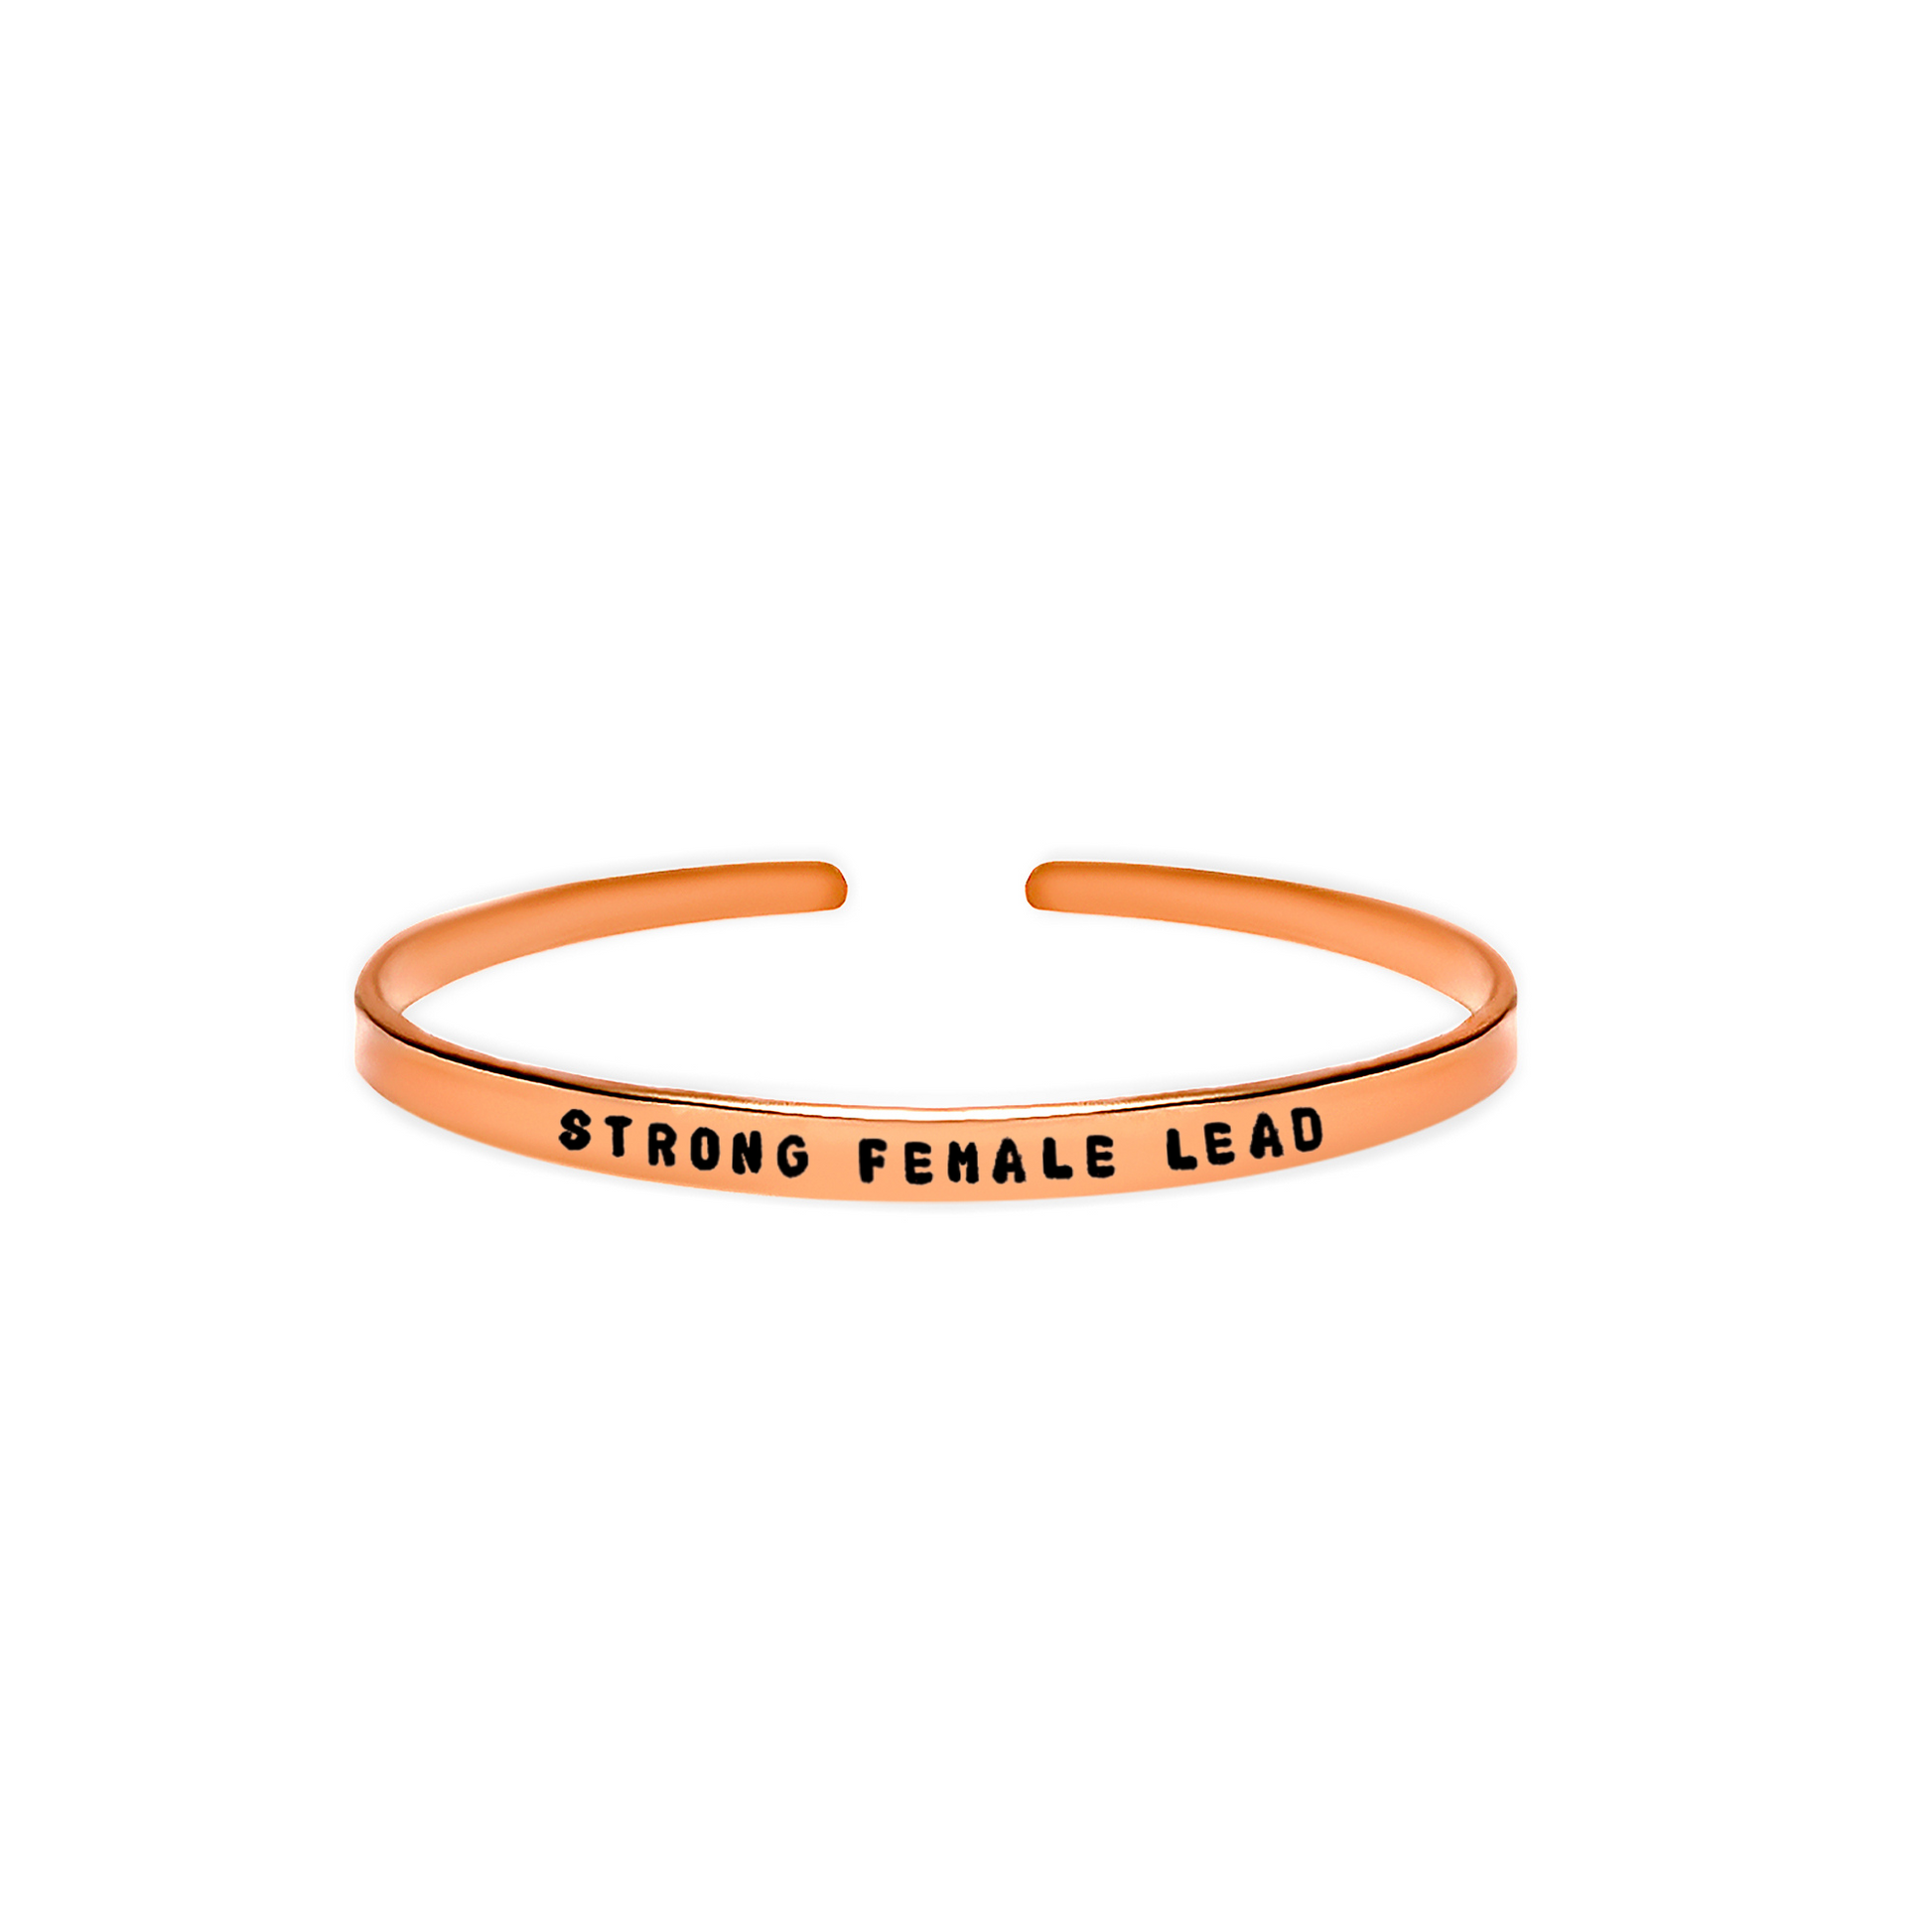 ‘Strong female lead’ empowering women and female strength quote bracelet 